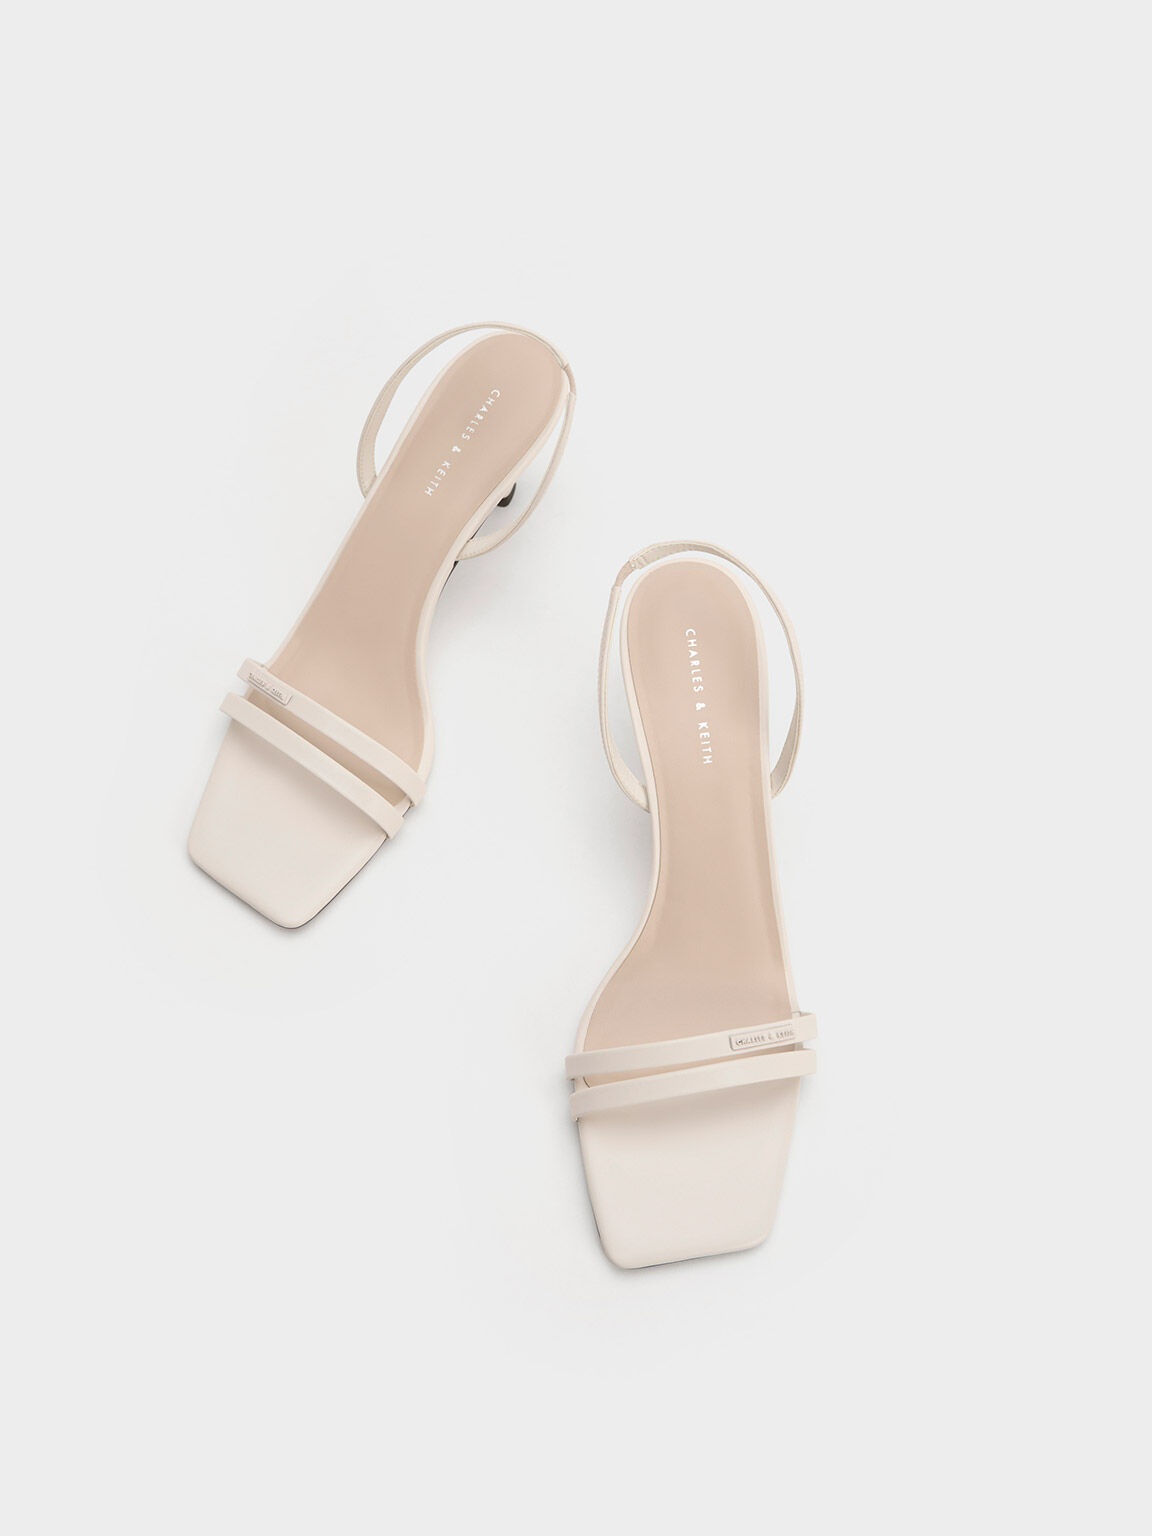 Double Strap Slingback Heeled Sandals, White, hi-res